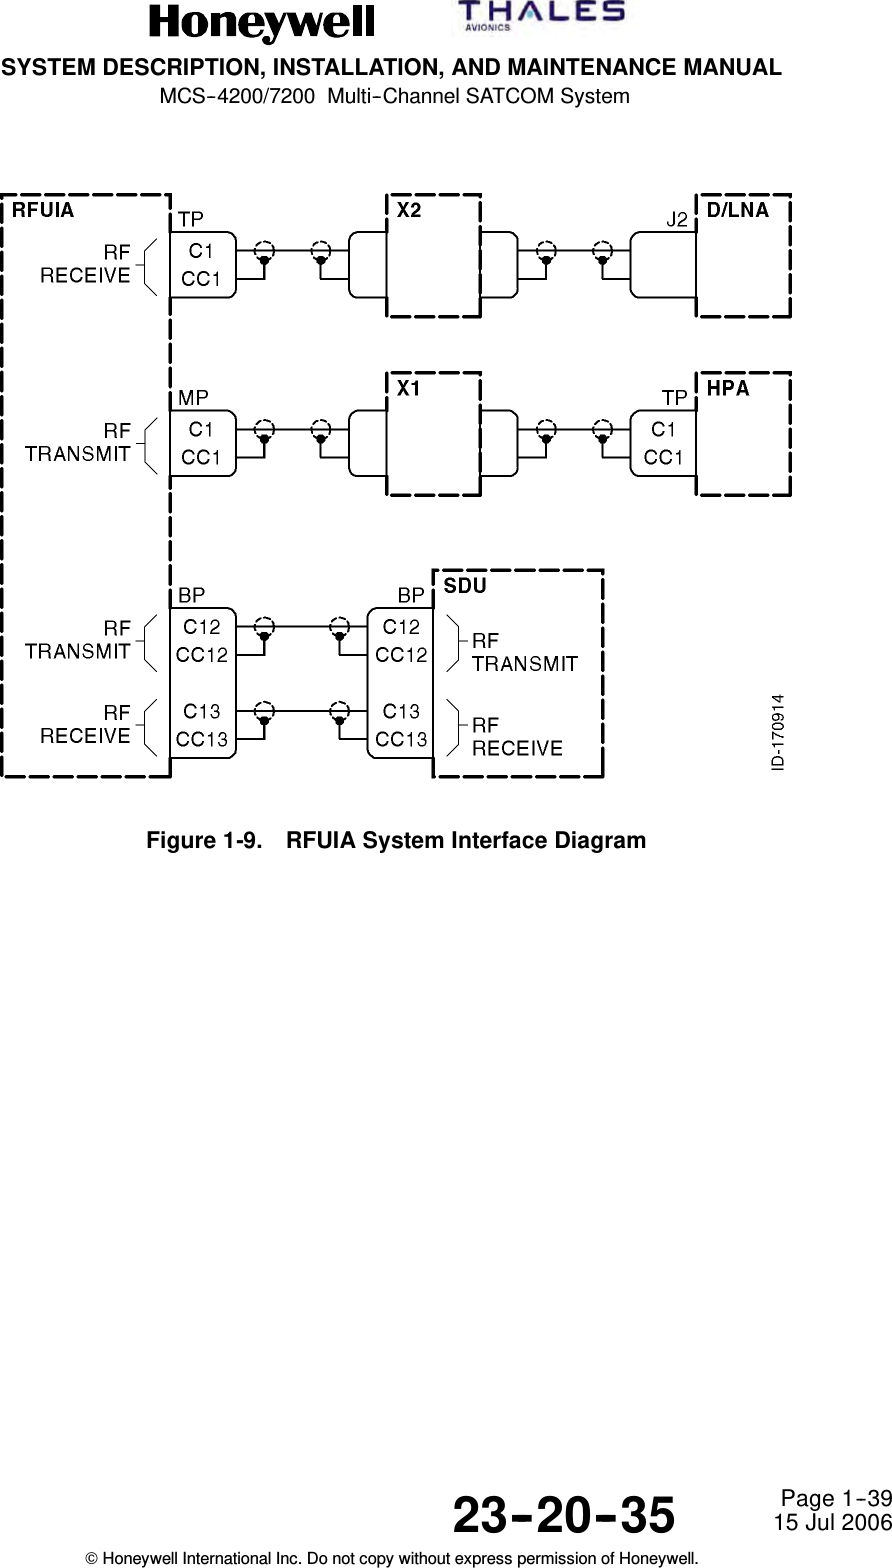 SYSTEM DESCRIPTION, INSTALLATION, AND MAINTENANCE MANUALMCS--4200/7200 Multi--Channel SATCOM System23--20--35 15 Jul 2006Honeywell International Inc. Do not copy without express permission of Honeywell.Page 1--39Figure 1-9. RFUIA System Interface Diagram